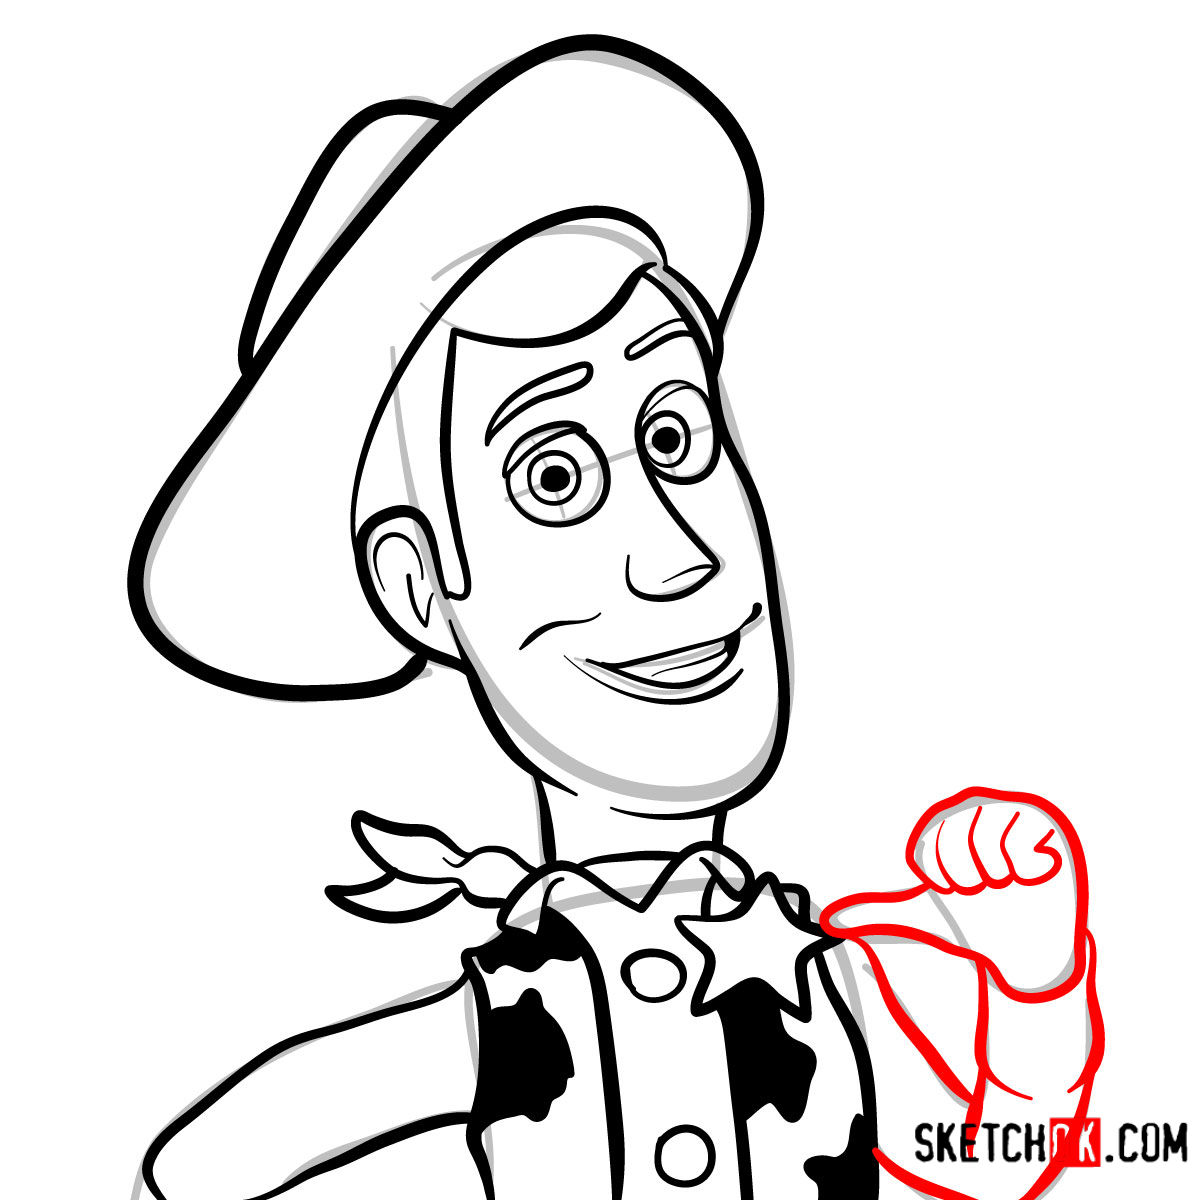 How to draw Woody's face | Toy Story - step 09